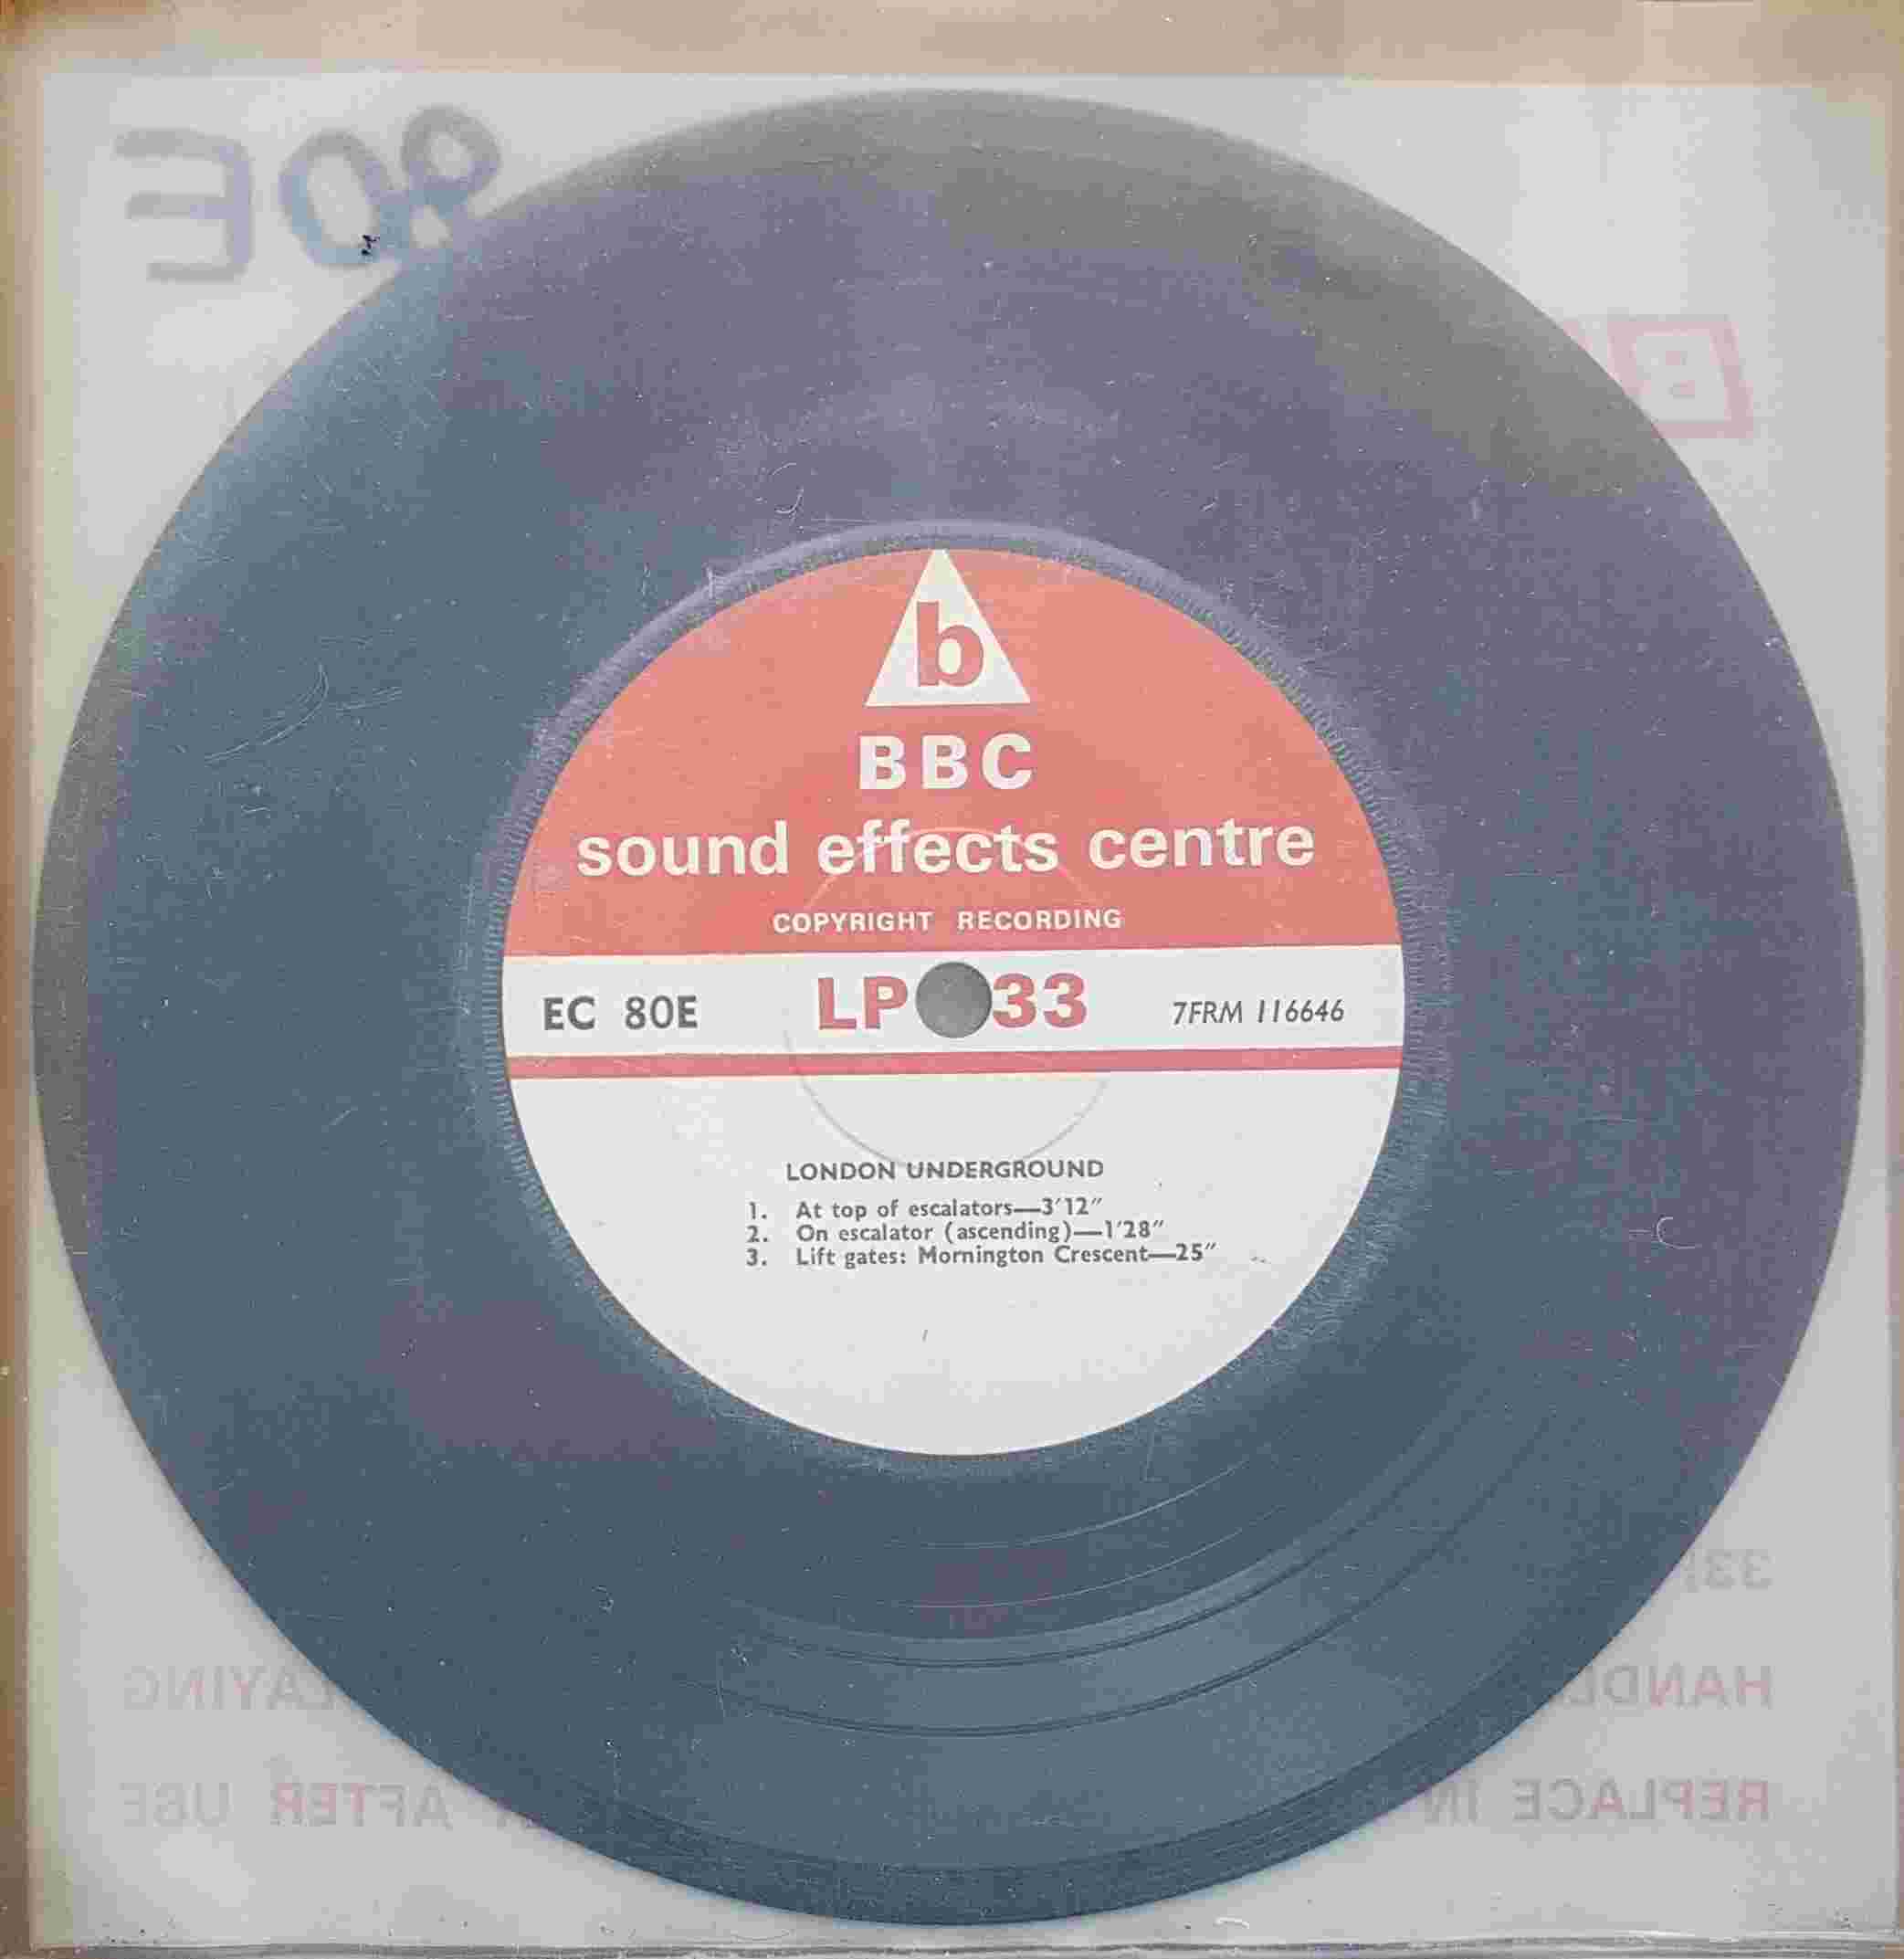 Picture of EC 80E London Underground by artist Not registered from the BBC records and Tapes library